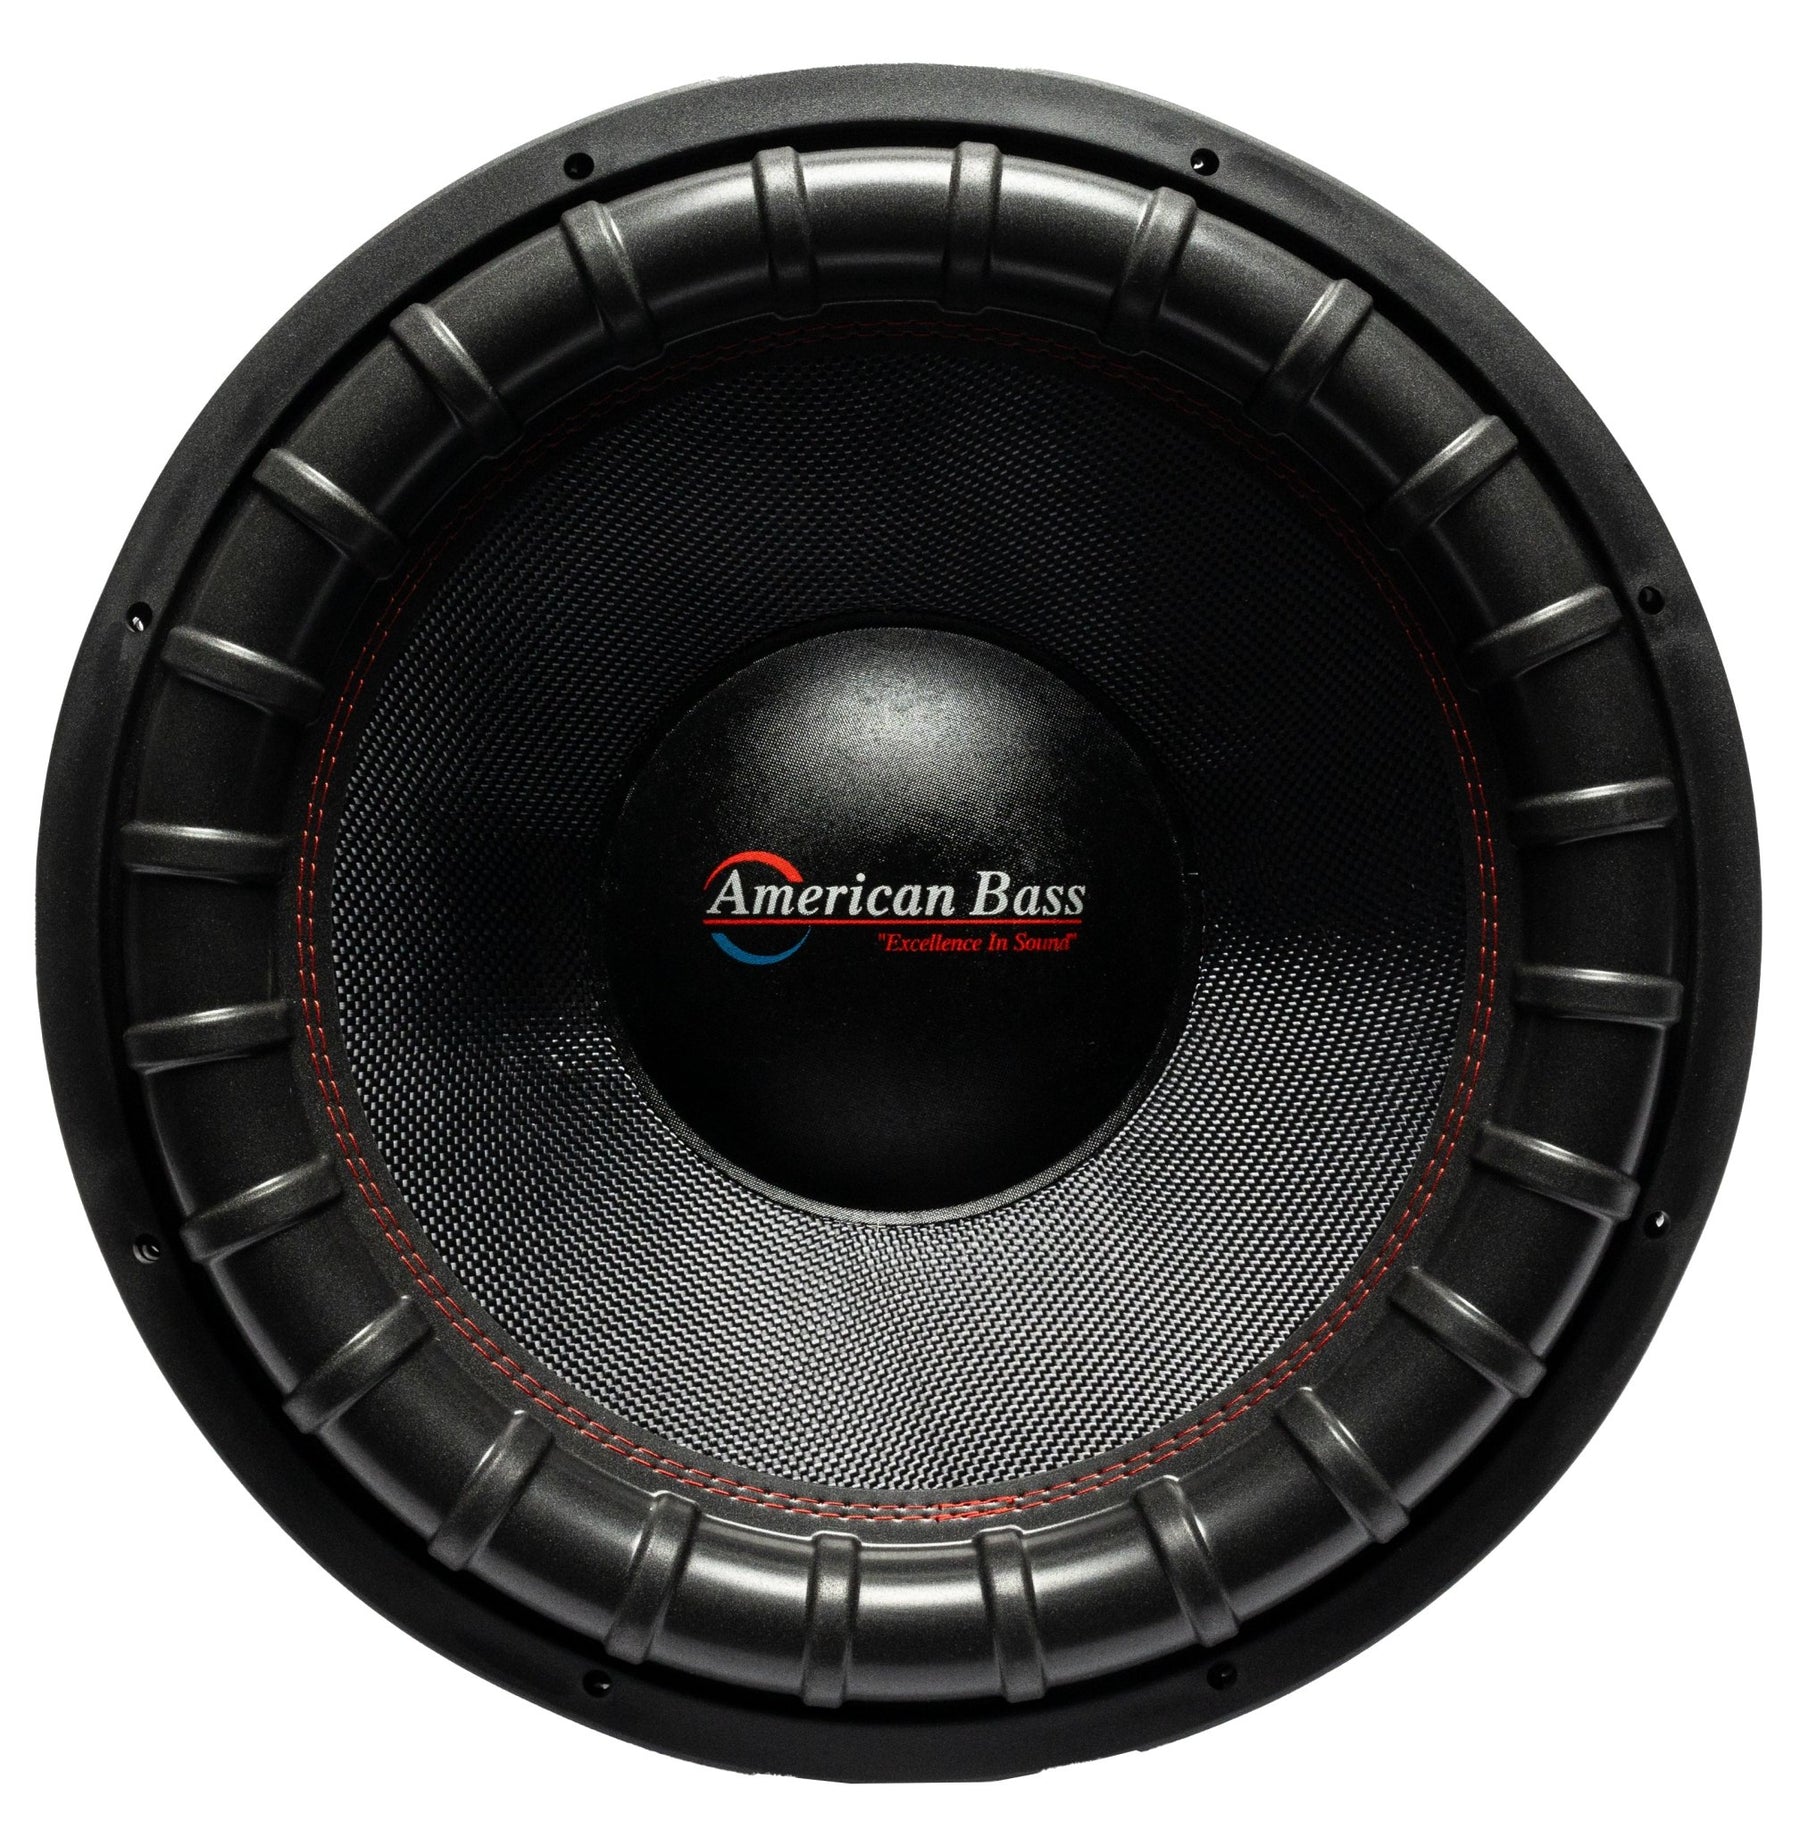 Godfather 18" Subwoofer - American Bass Audio